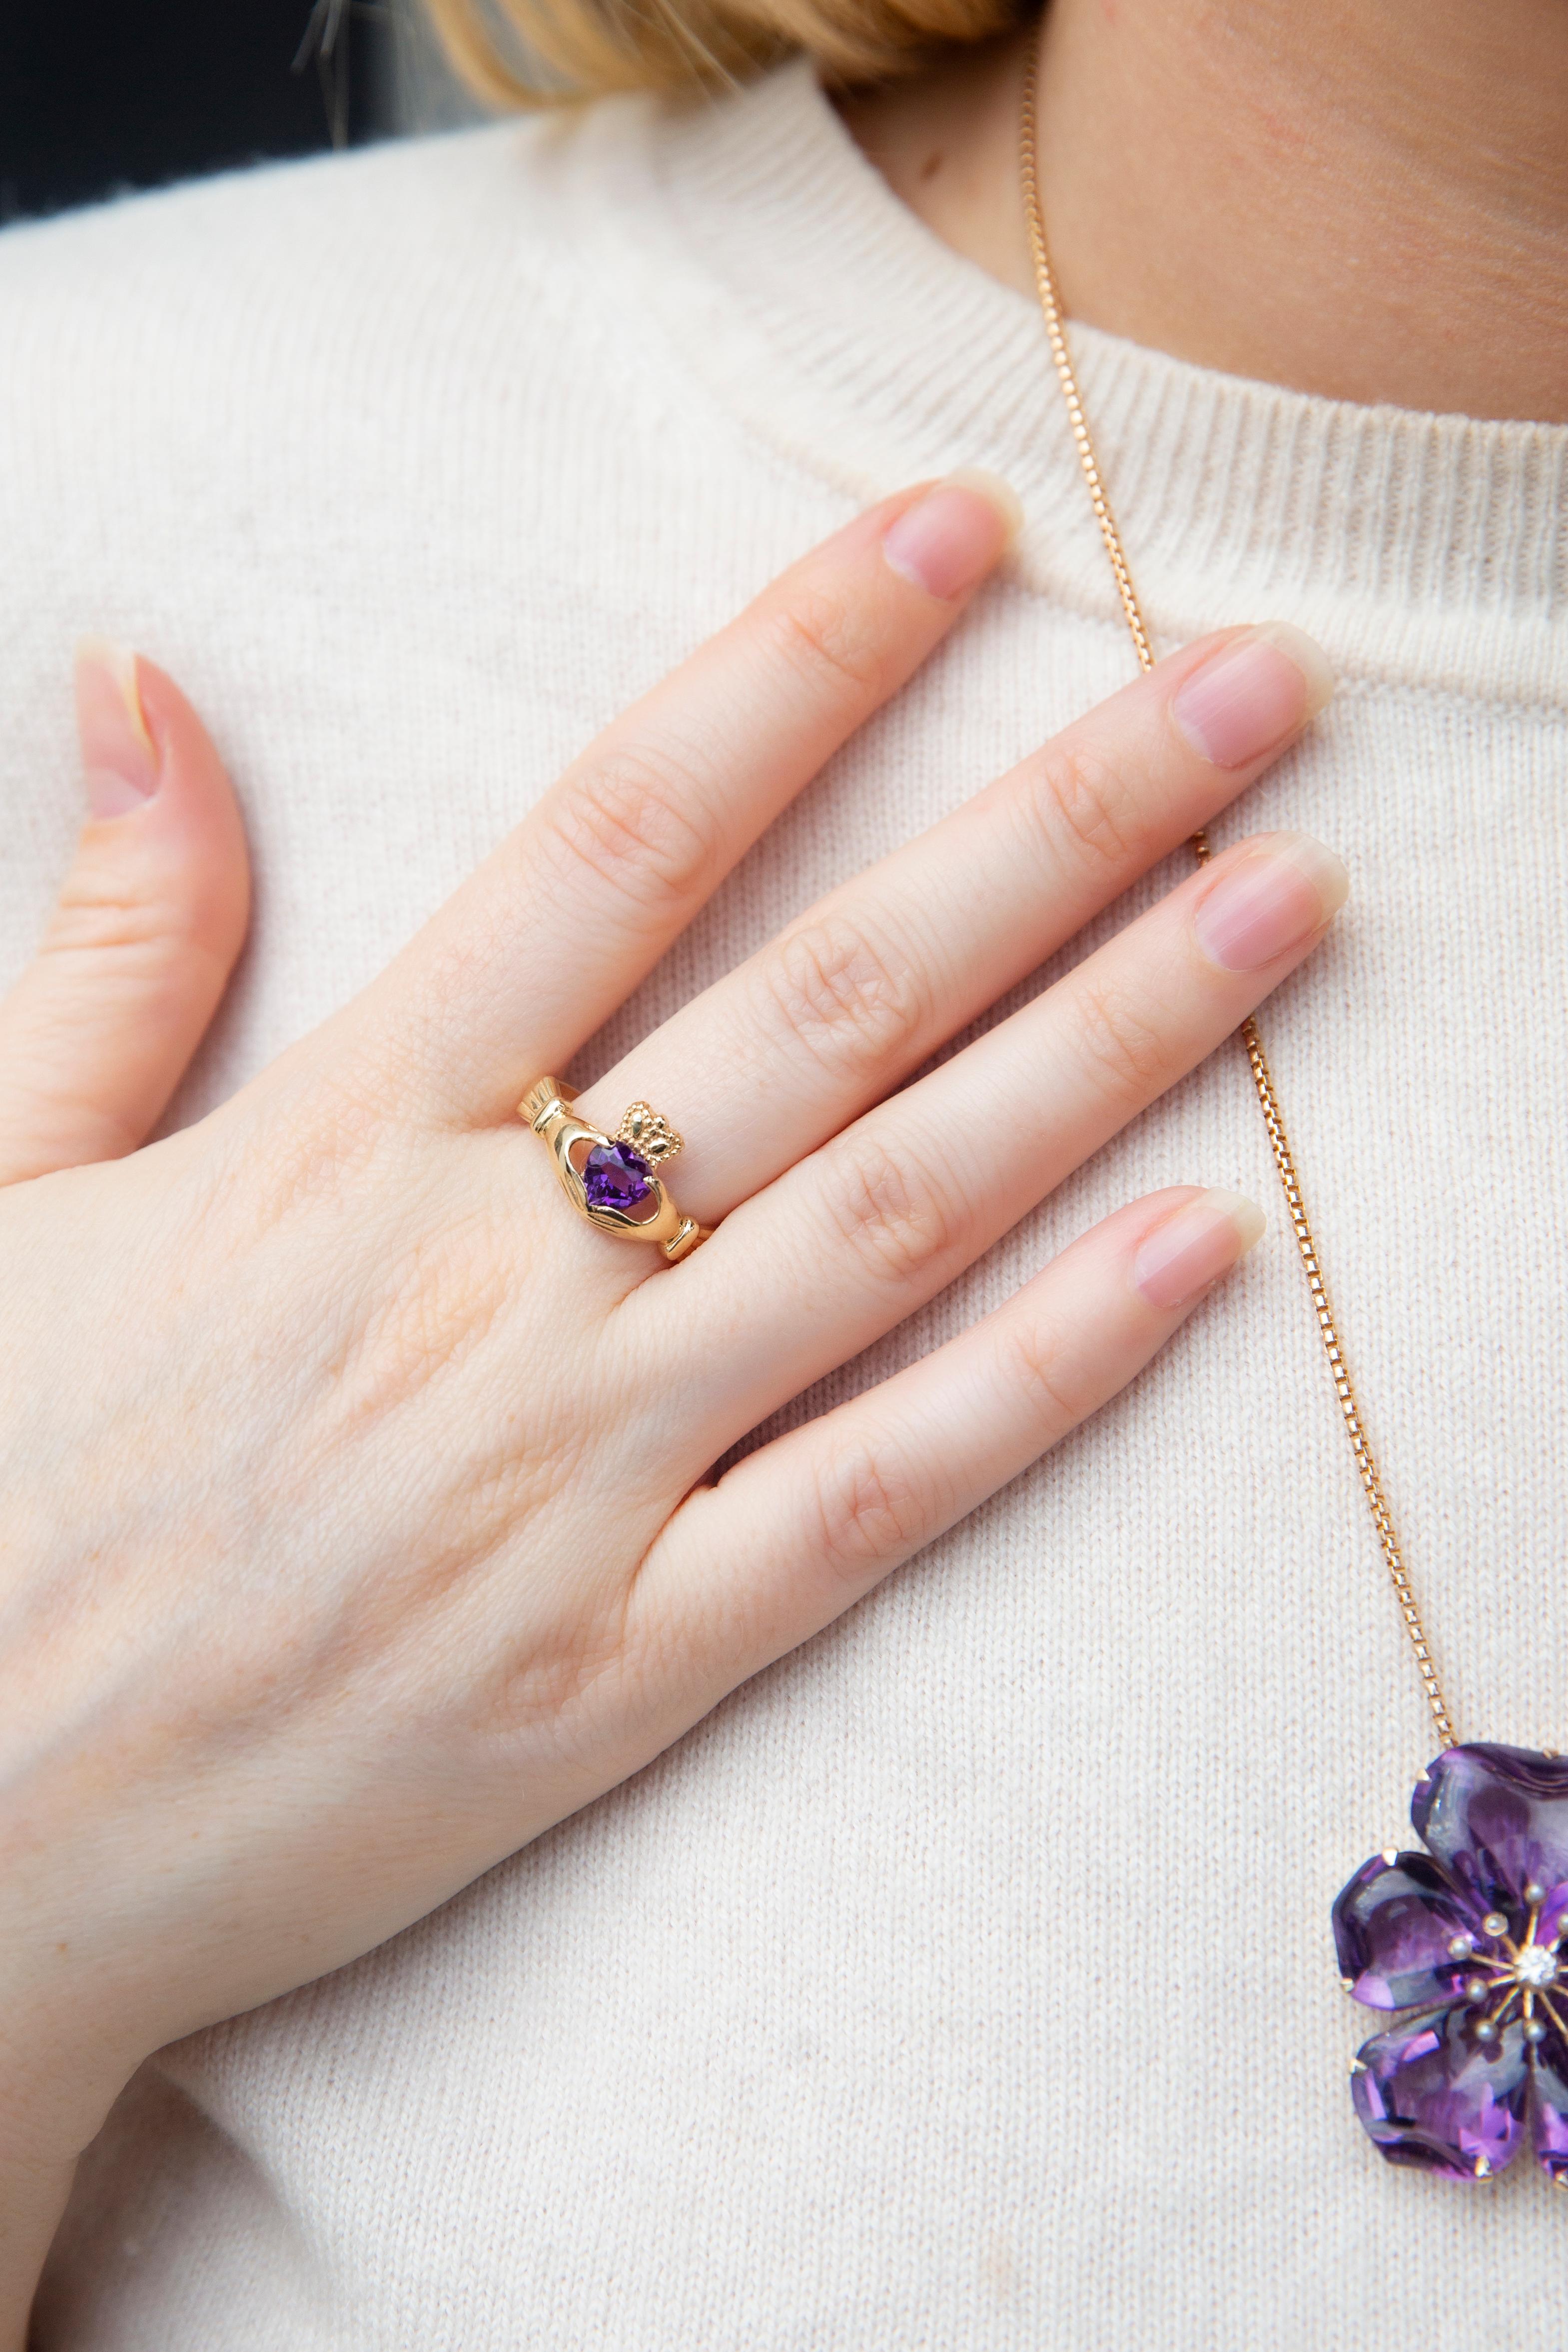 Vintage Circa 1970s Deep Purple Amethyst Cluster Cocktail Ring 9 Carat Gold For Sale 5